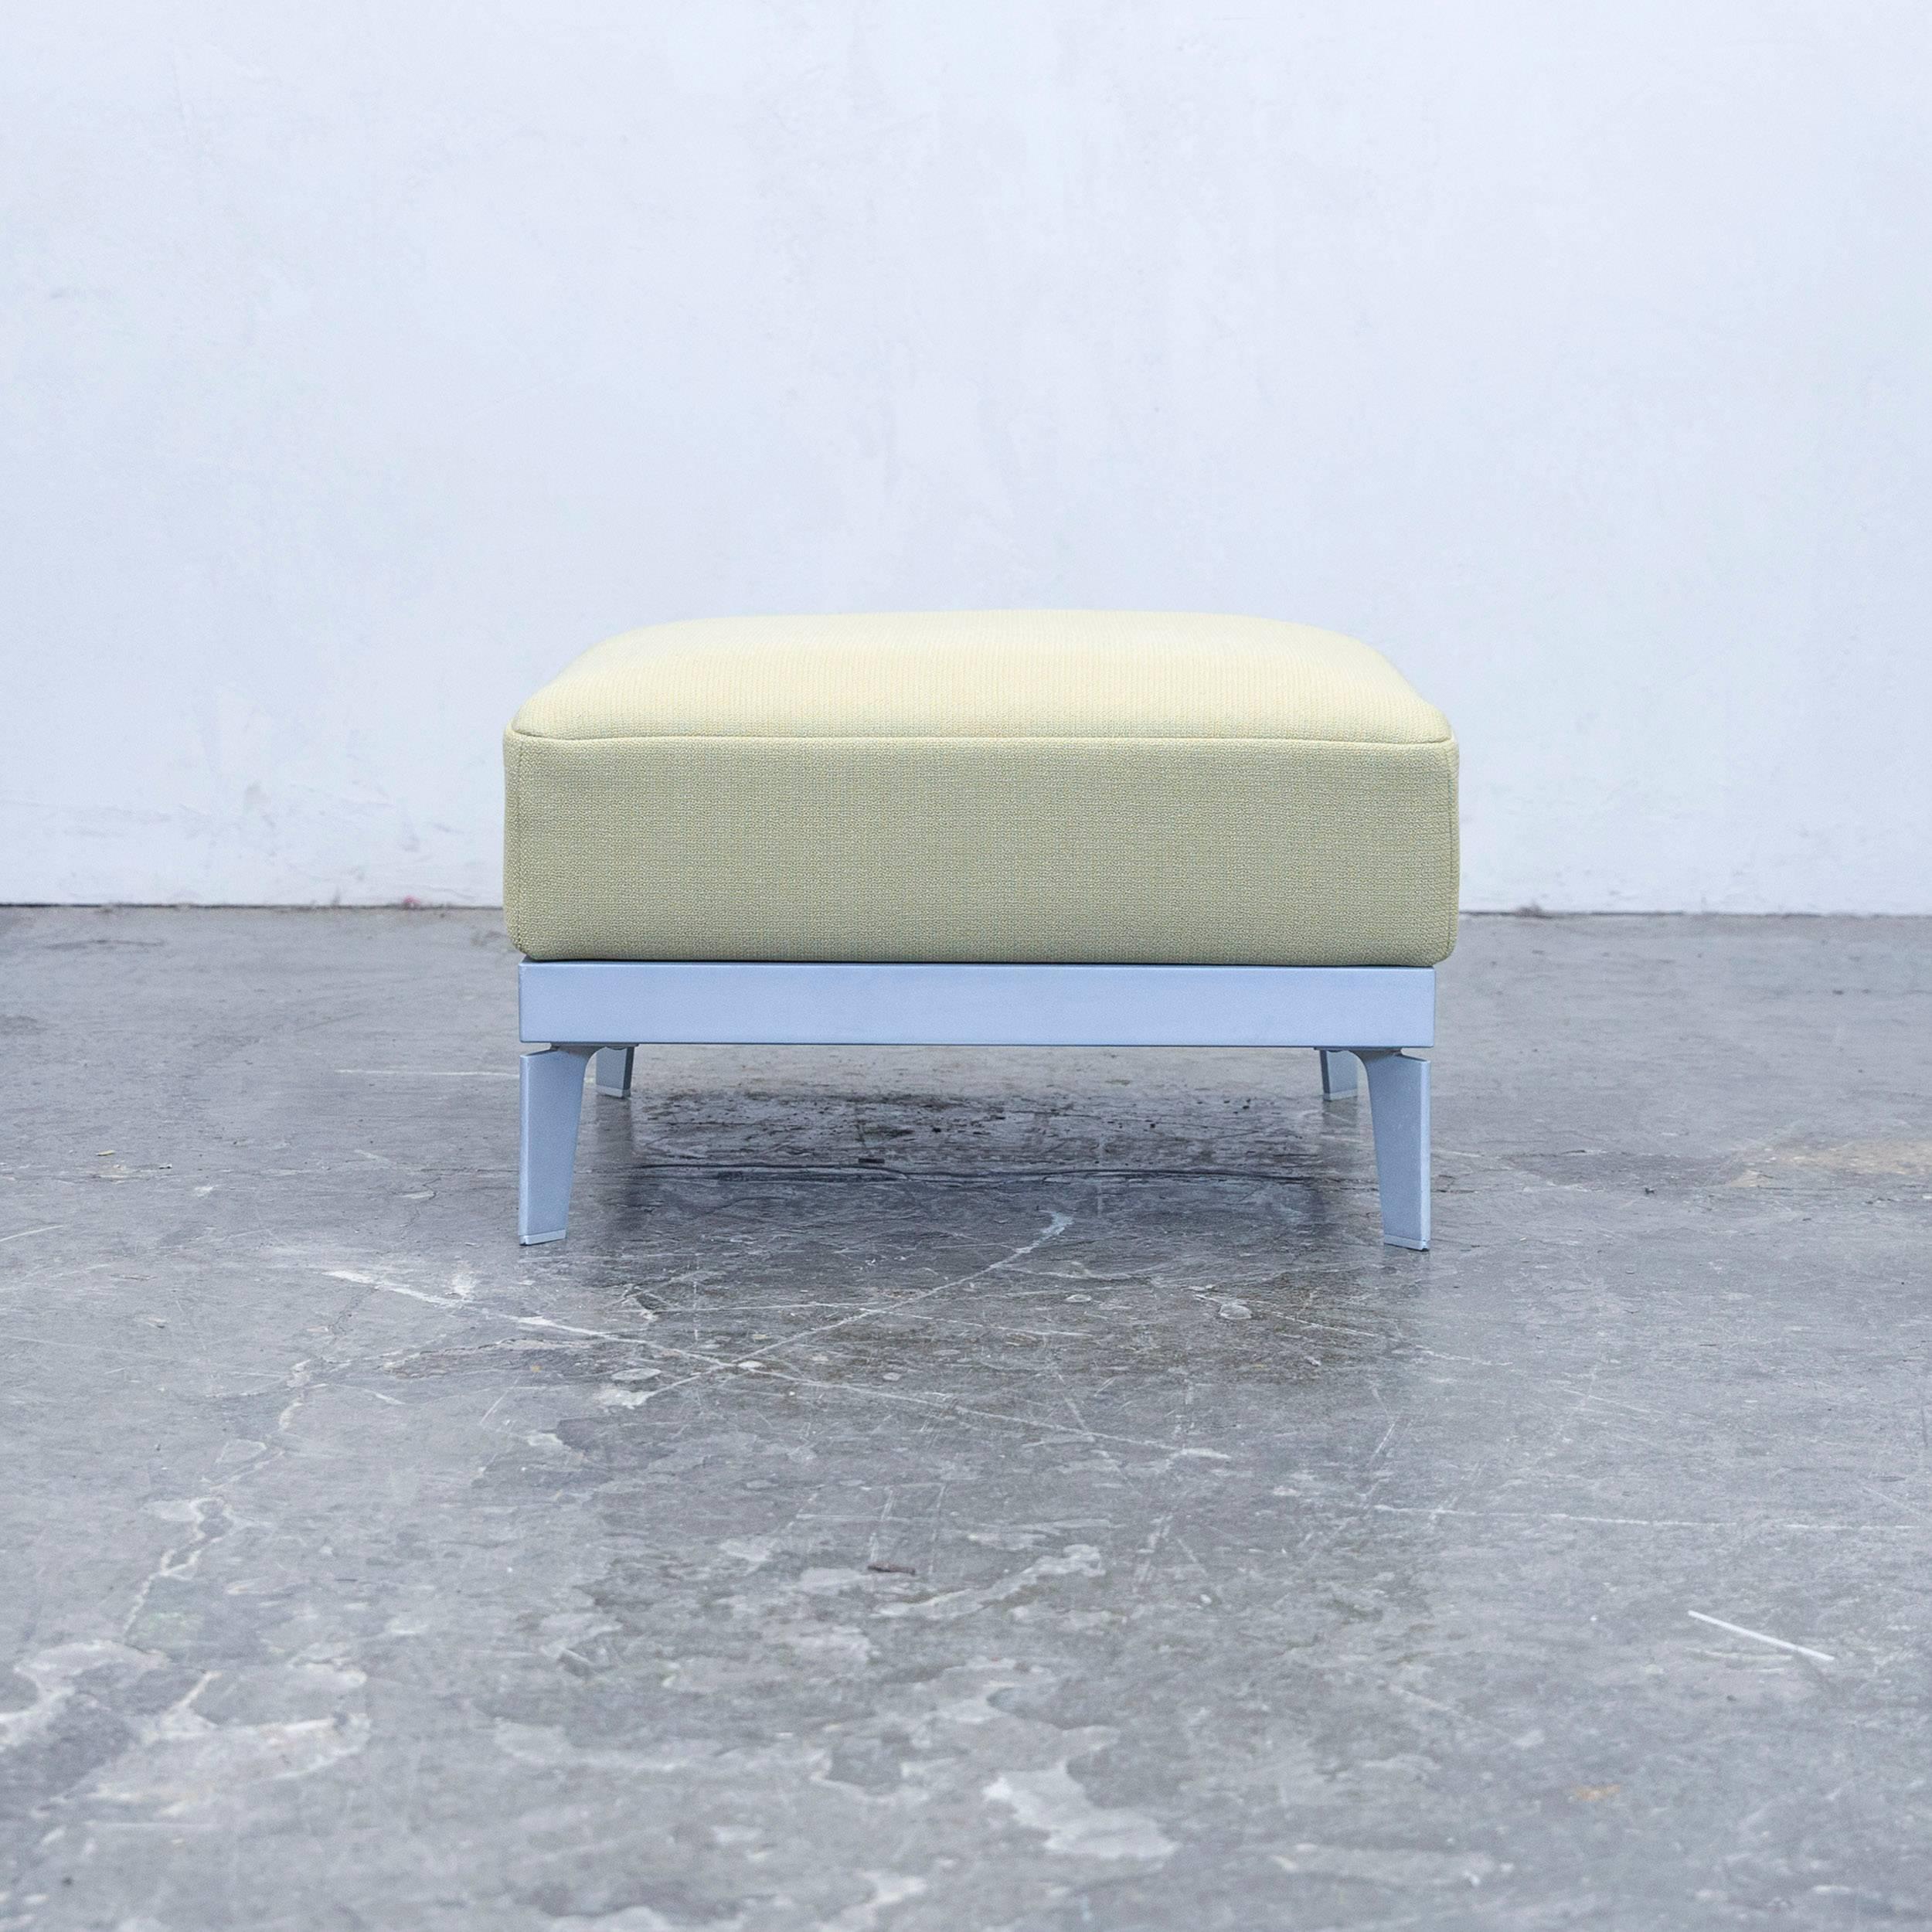 Green colored original Rolf Benz Plura designer footstool, in a minimalistic and modern design, made for pure comfort.